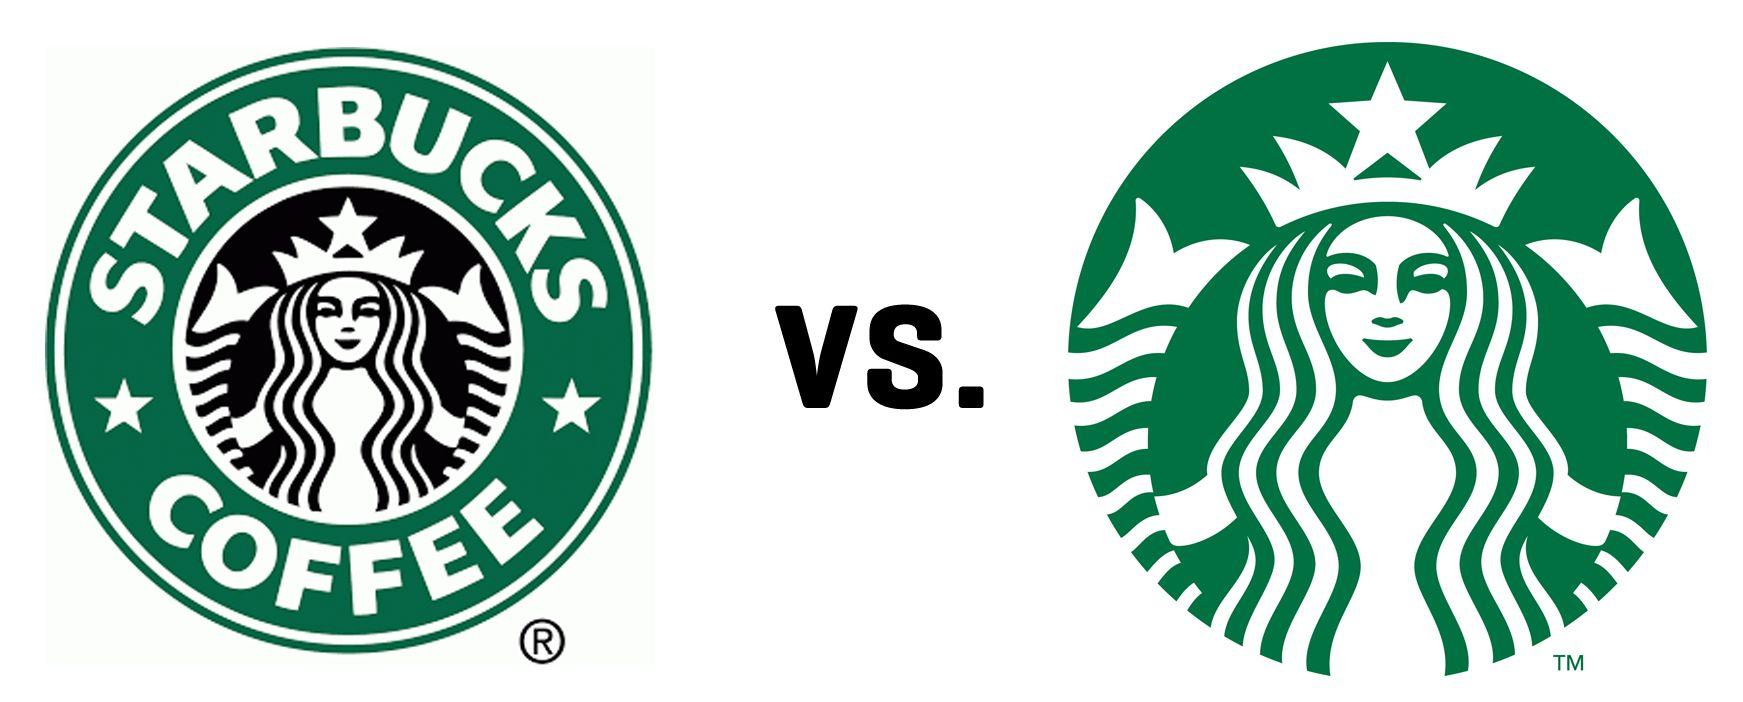 Large Starbucks Logo - Was It A Good Decision For Starbucks To Remove Their Name From Their ...